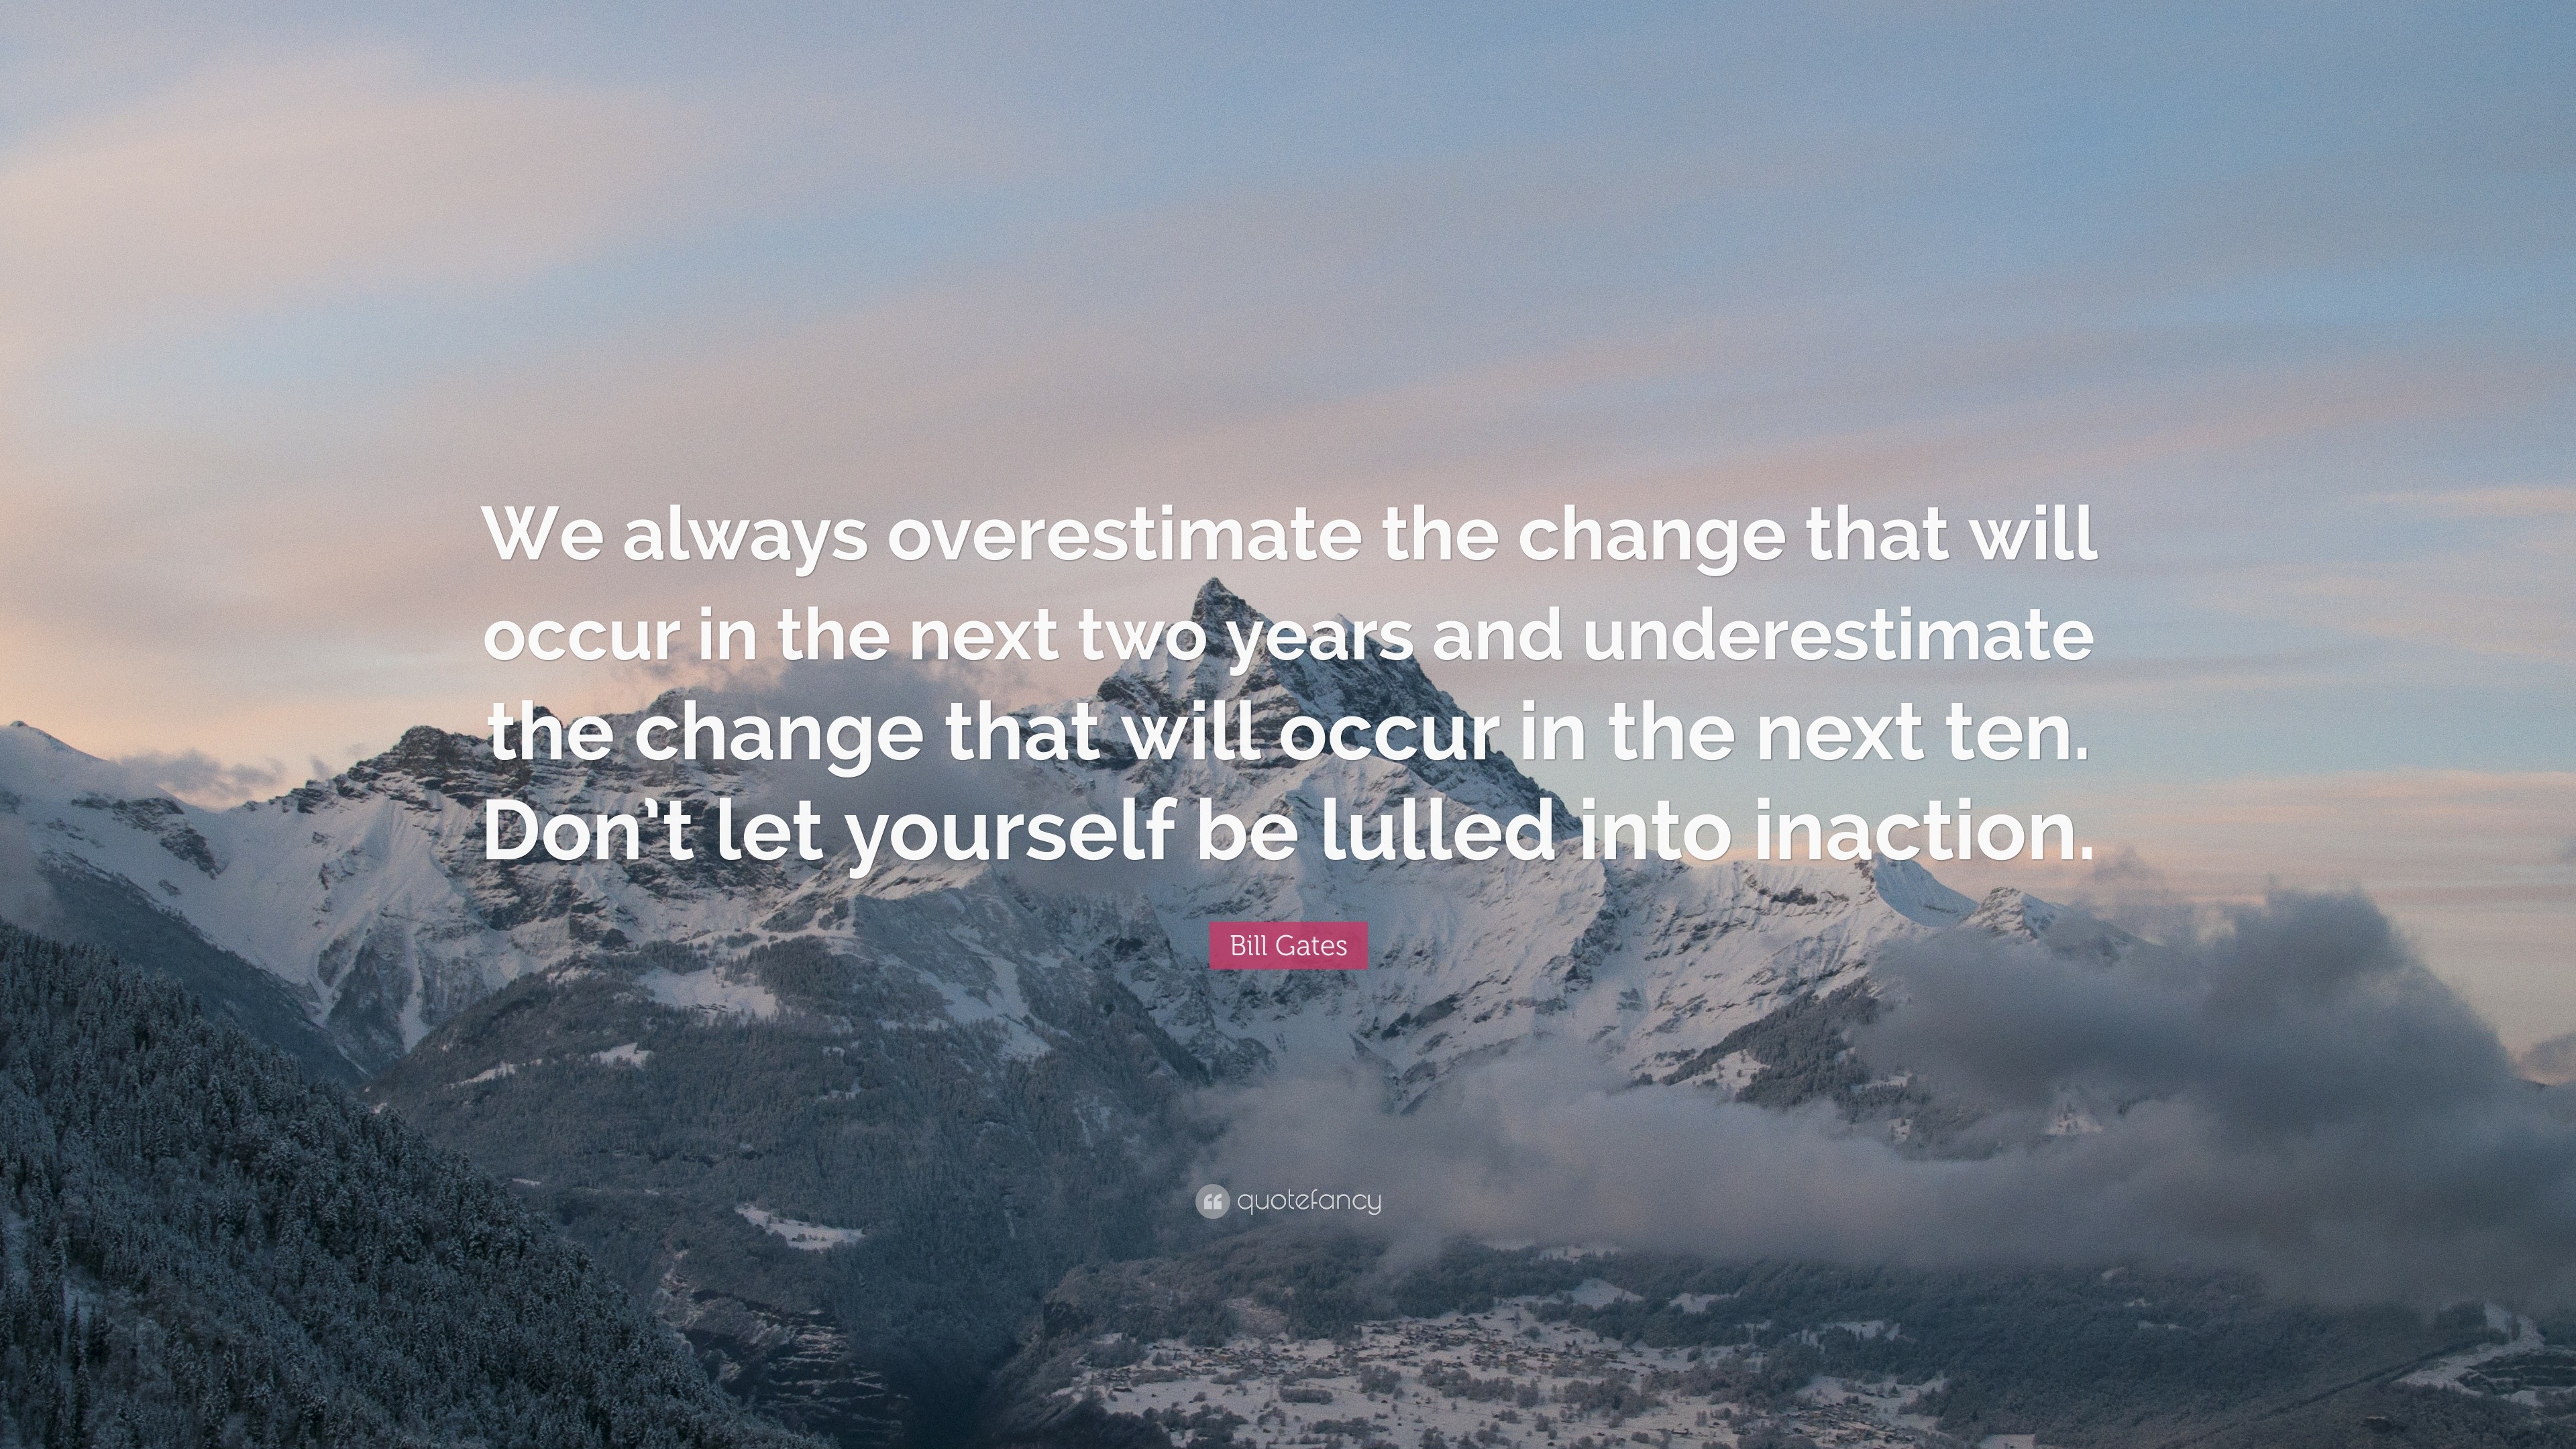 Bill Gates Quote: “We always overestimate the change that will occur in the next two years and underestimate the change that will occur in ...”